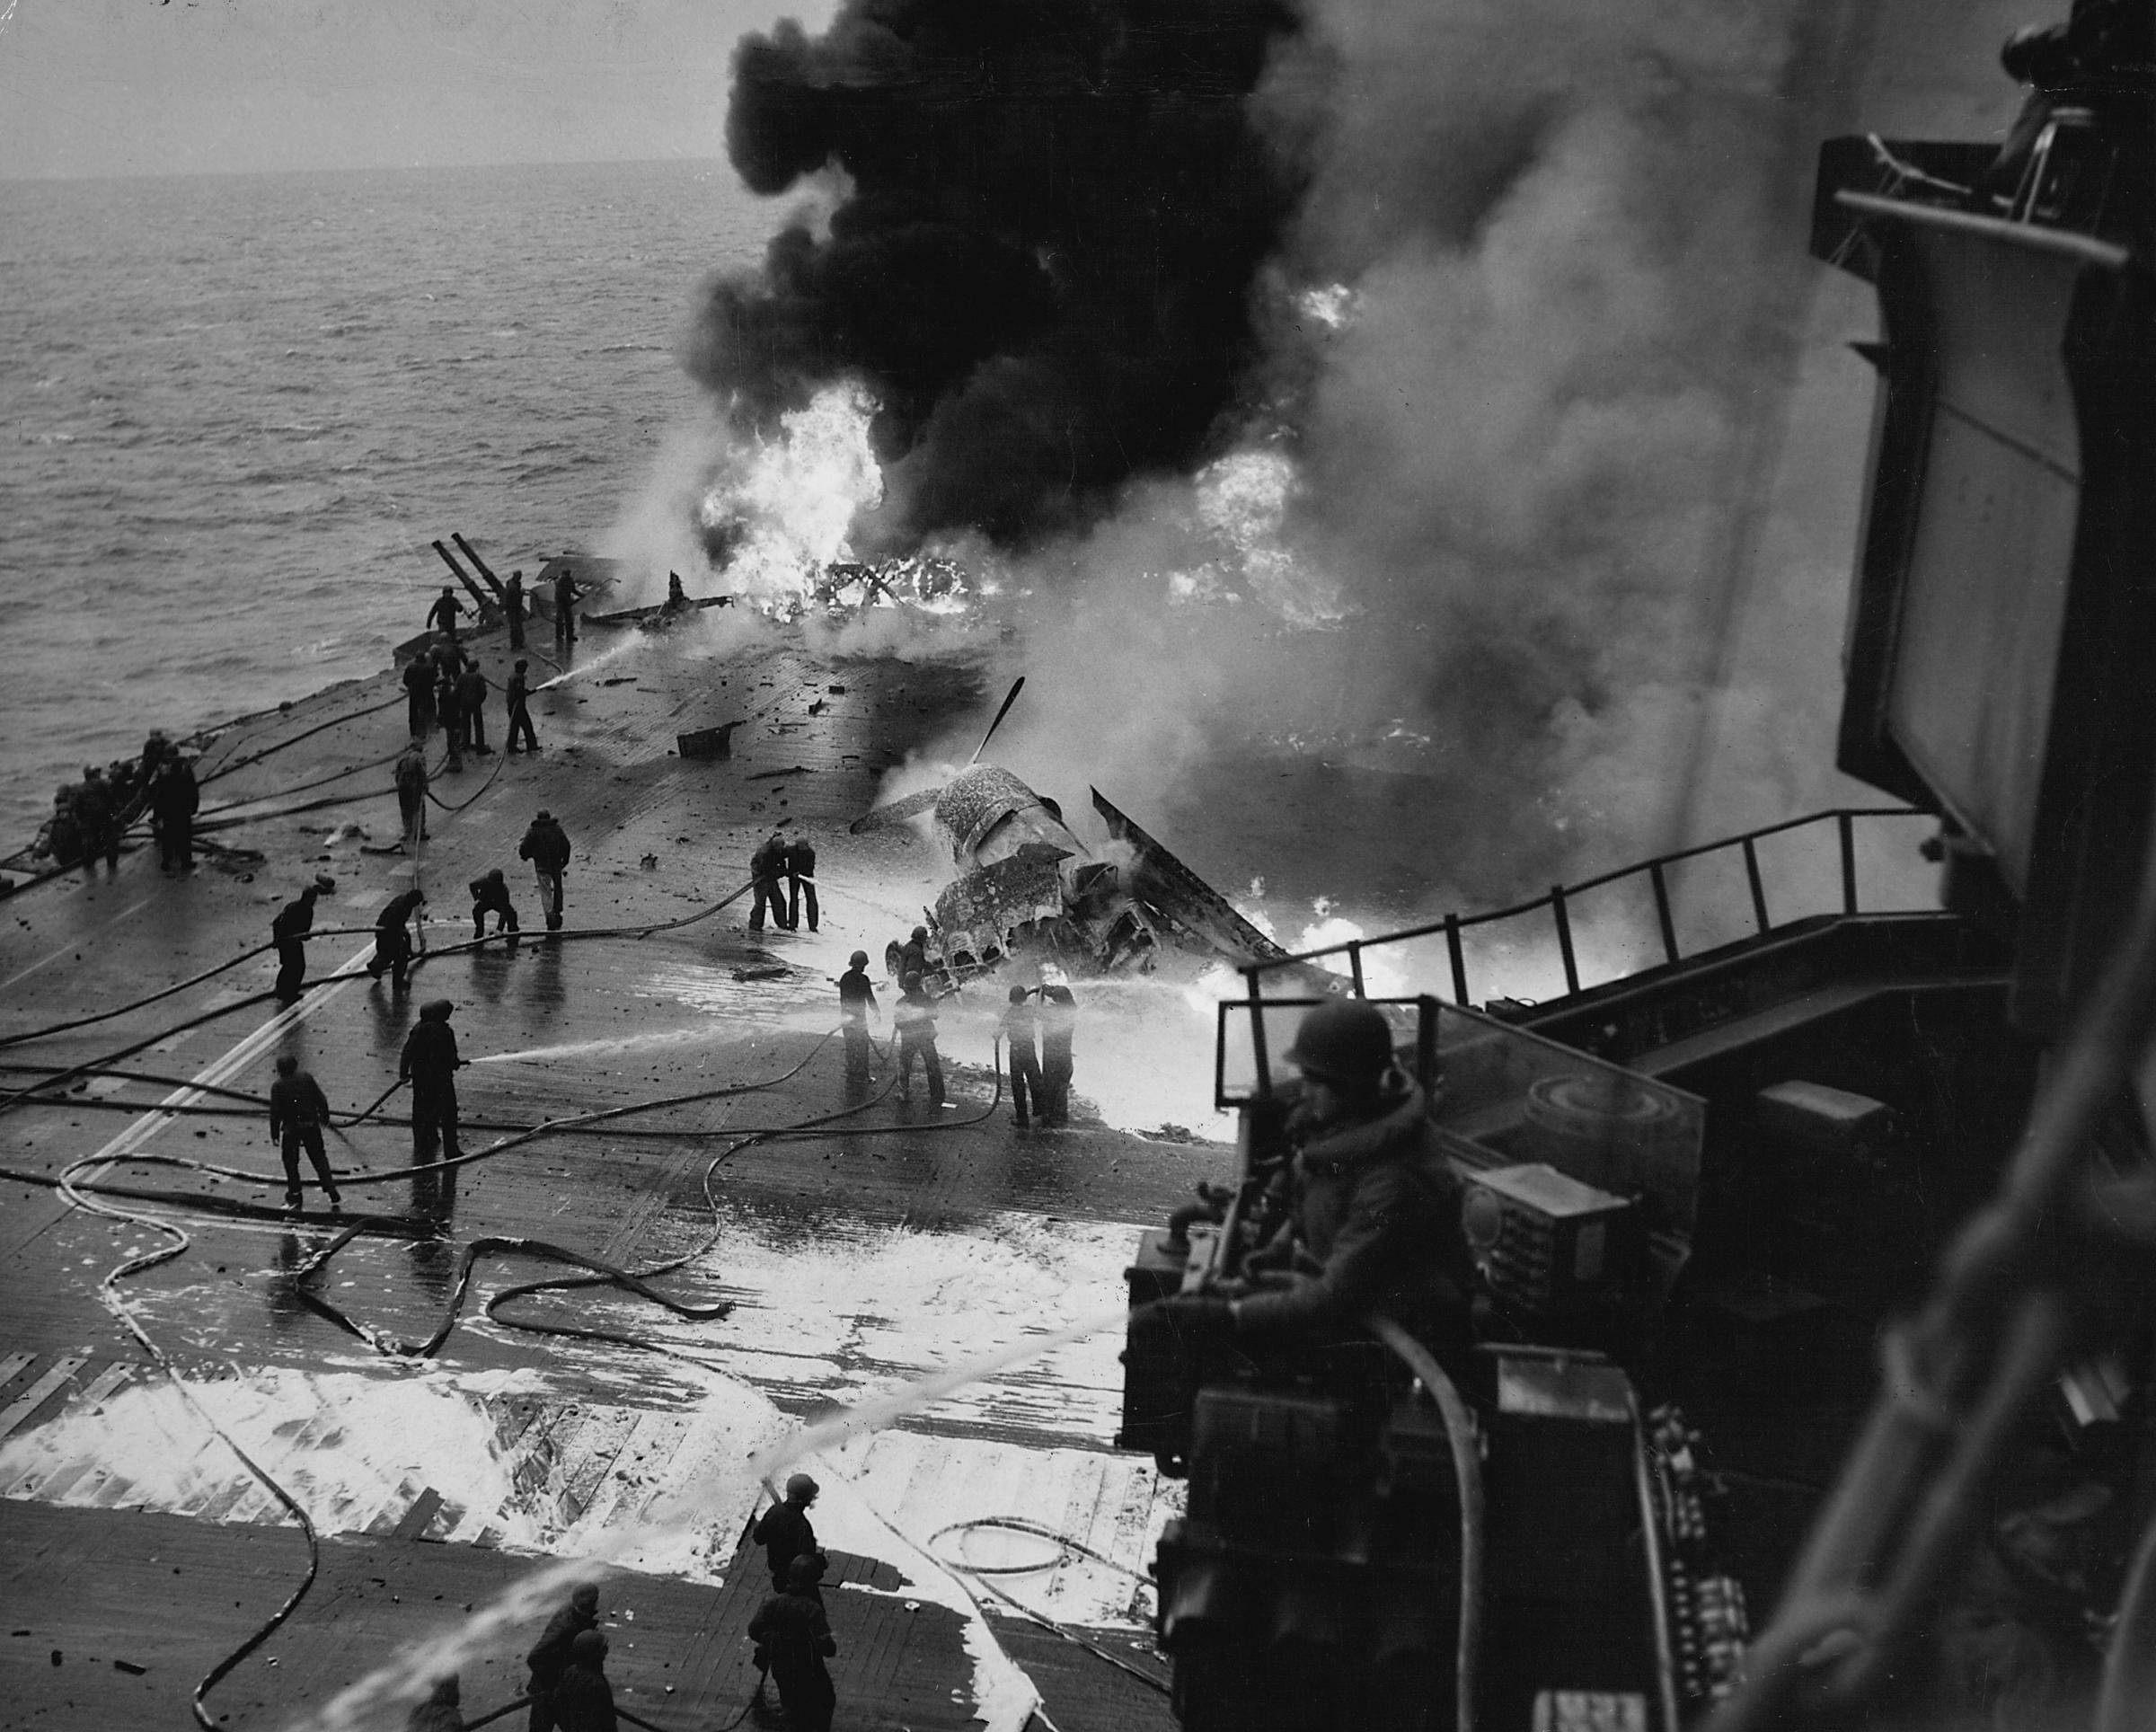 Crewmen fight fires on the deck of the USS Saratoga, which was badly damaged and set ablaze after being hit several times by Japanese bomber planes and kamikaze attacks off of Iwo Jima, 1945.